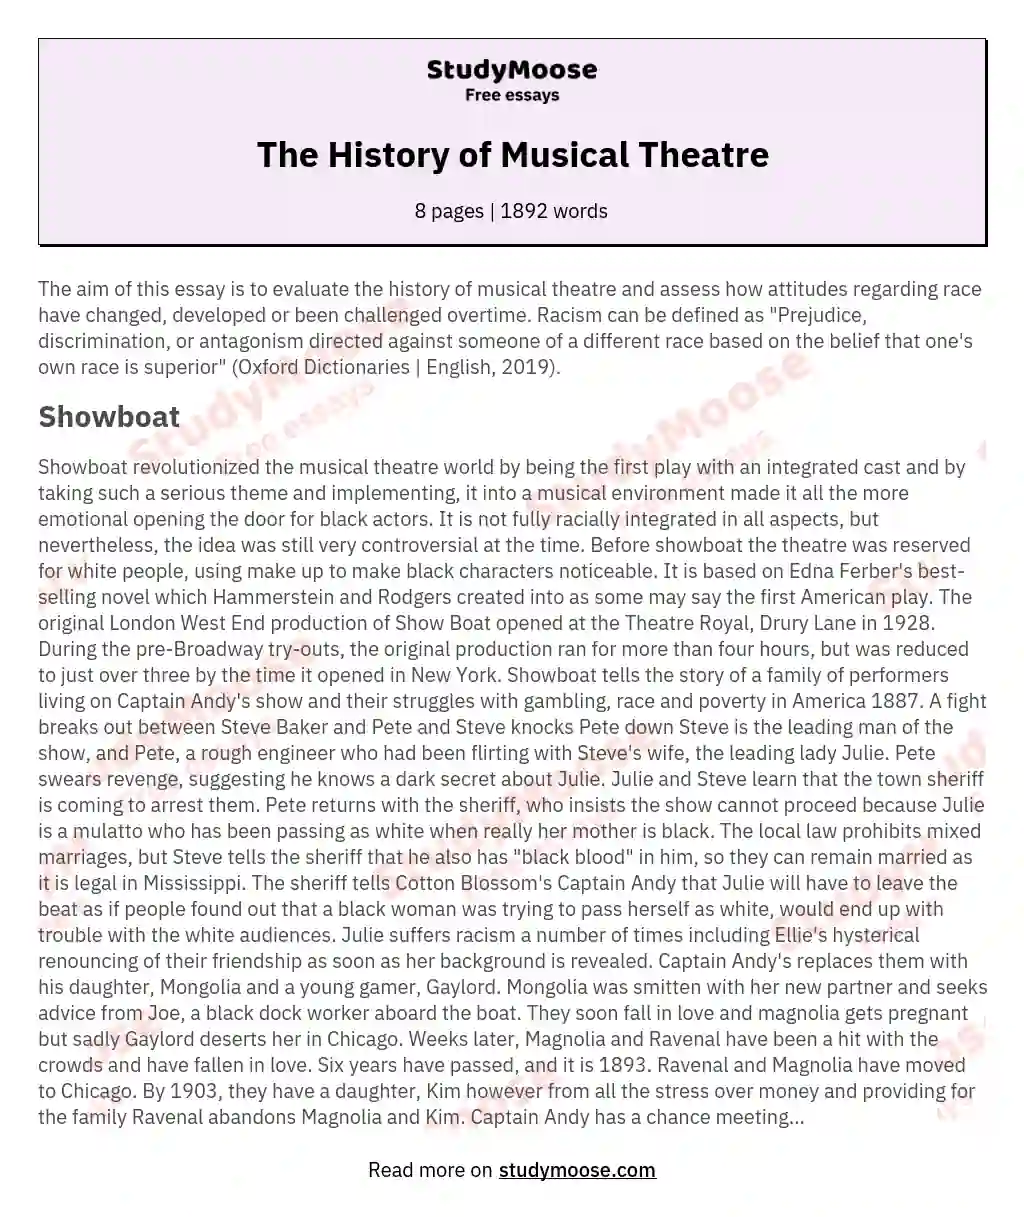 The History of Musical Theatre essay